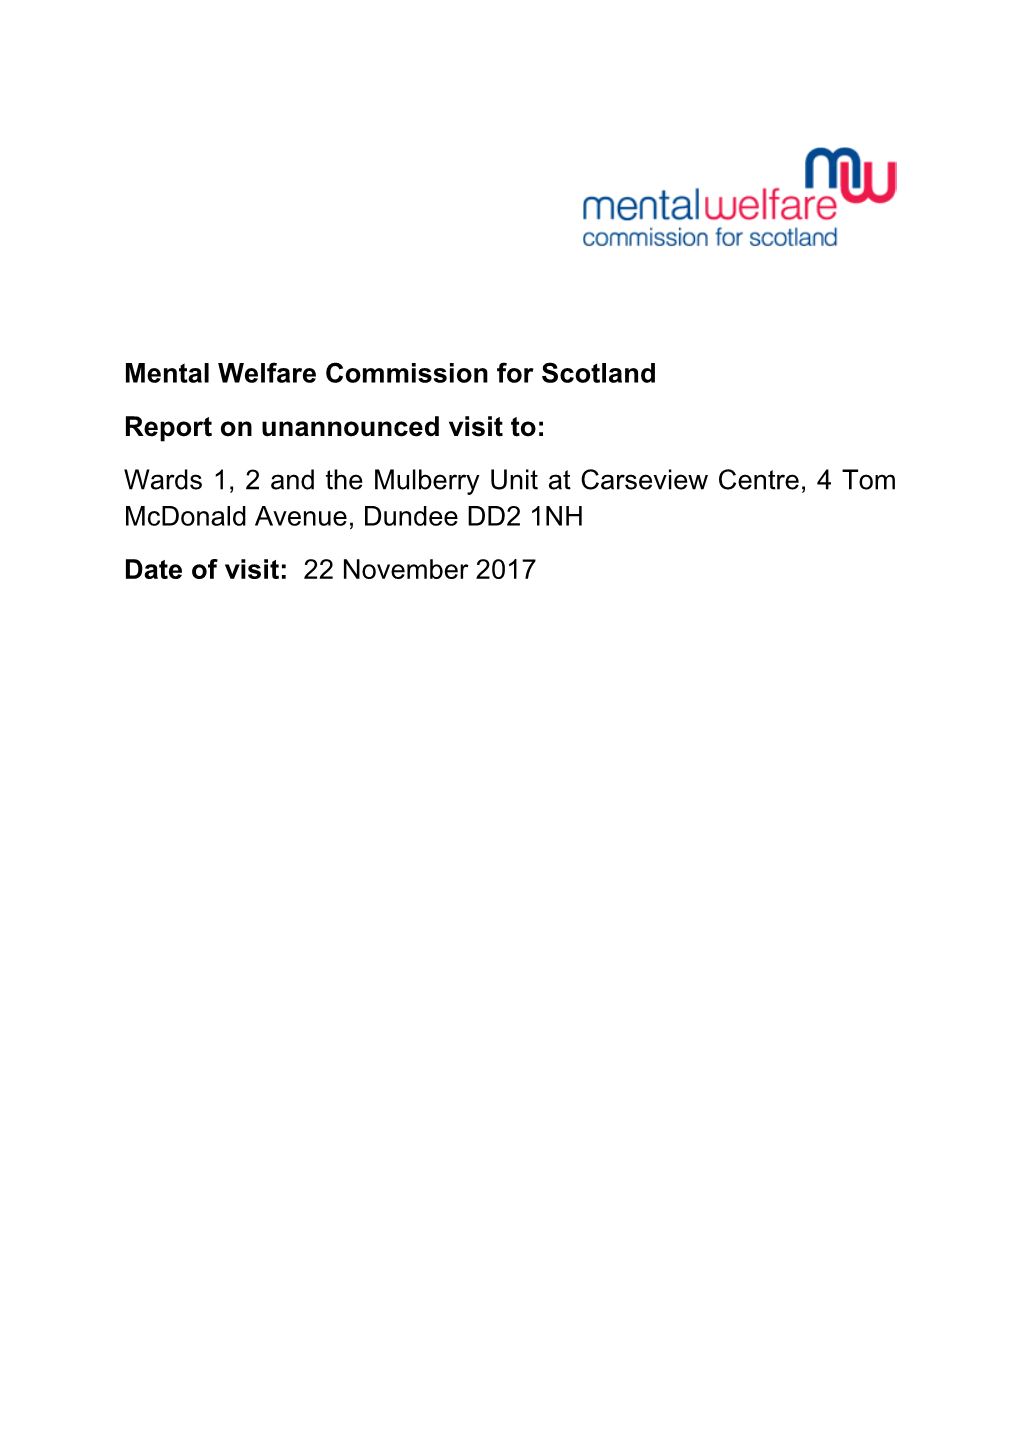 Wards 1, 2 and the Mulberry Unit at Carseview Centre, 4 Tom Mcdonald Avenue, Dundee DD2 1NH Date of Visit: 22 November 2017